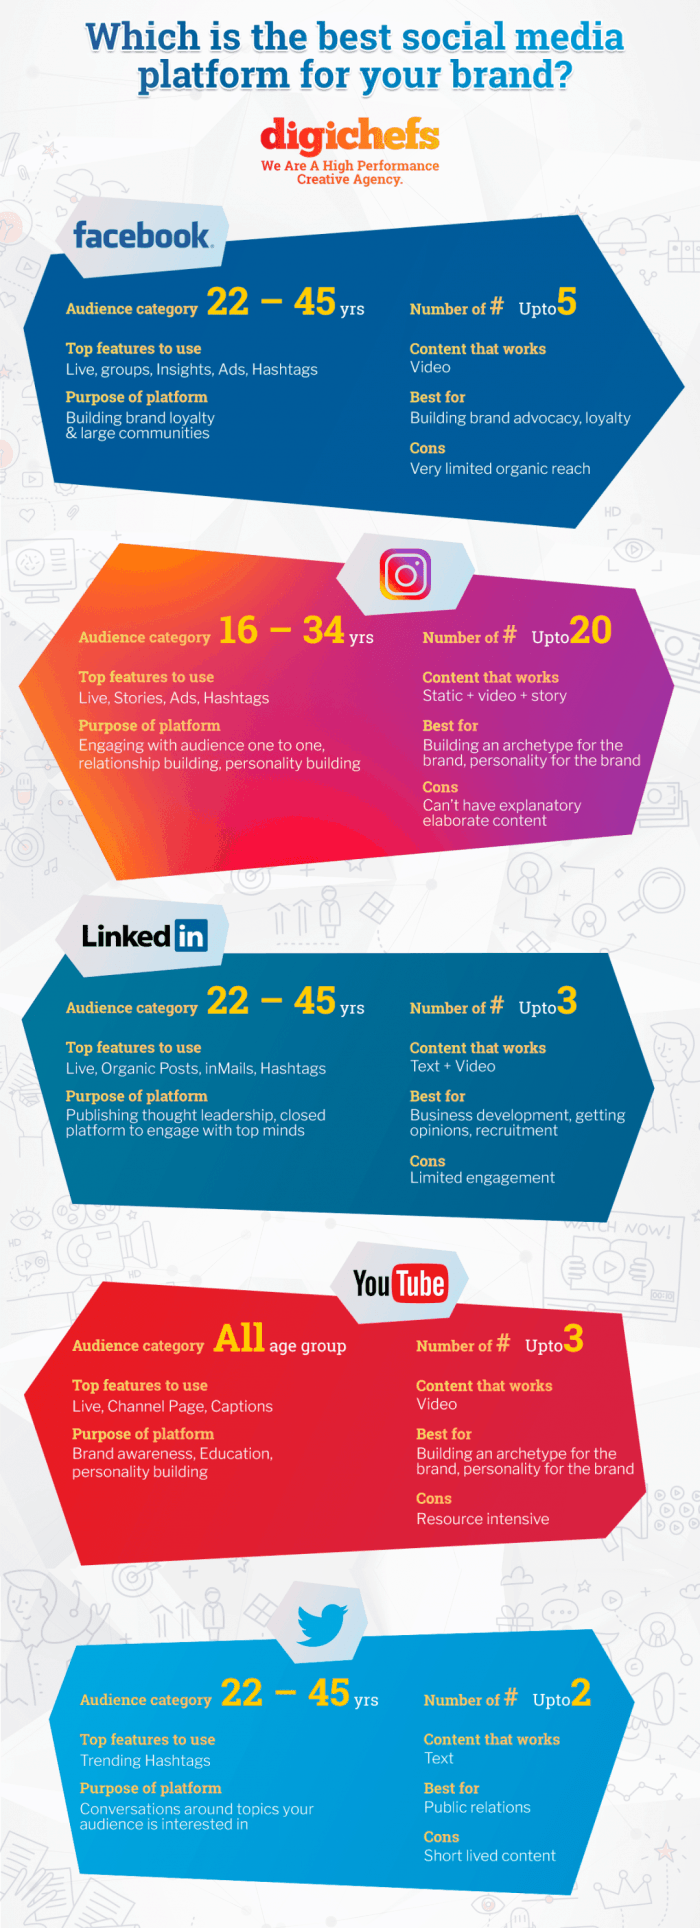 Stats provided in this infographic show details of social media effectiveness.